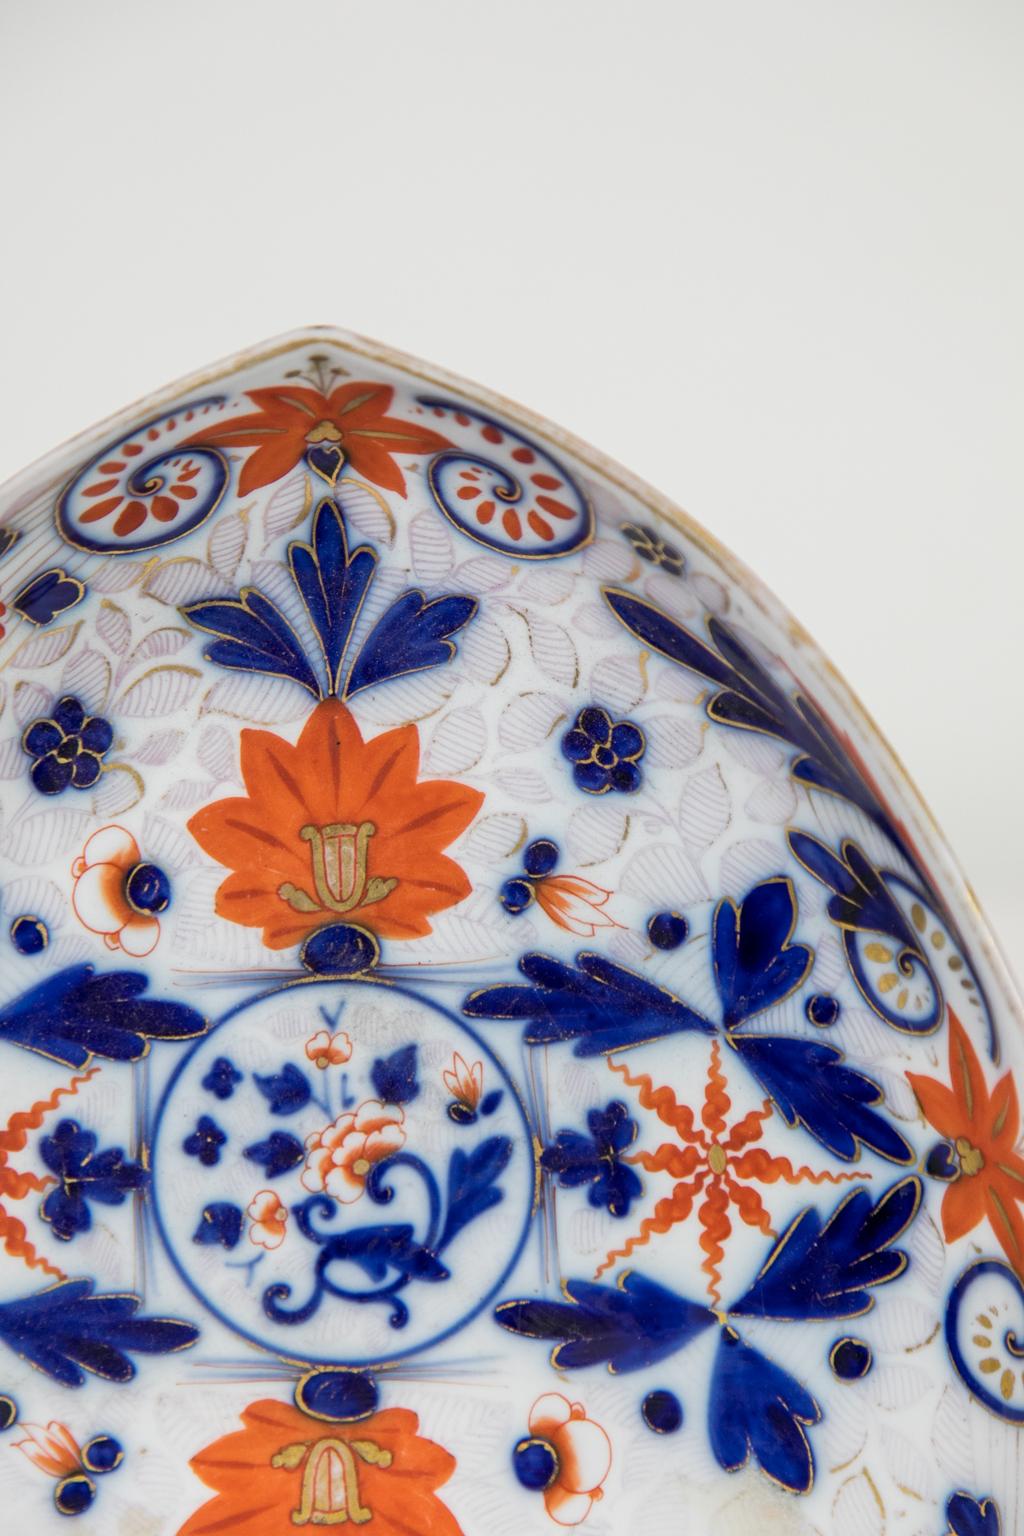 This serving dish has a shield shape with red and blue floral and leaf designs. While there is no identifying mark the decoration, glaze, and shape of the underfoot would indicate a date of manufacture circa mid-19th century. The gilding has